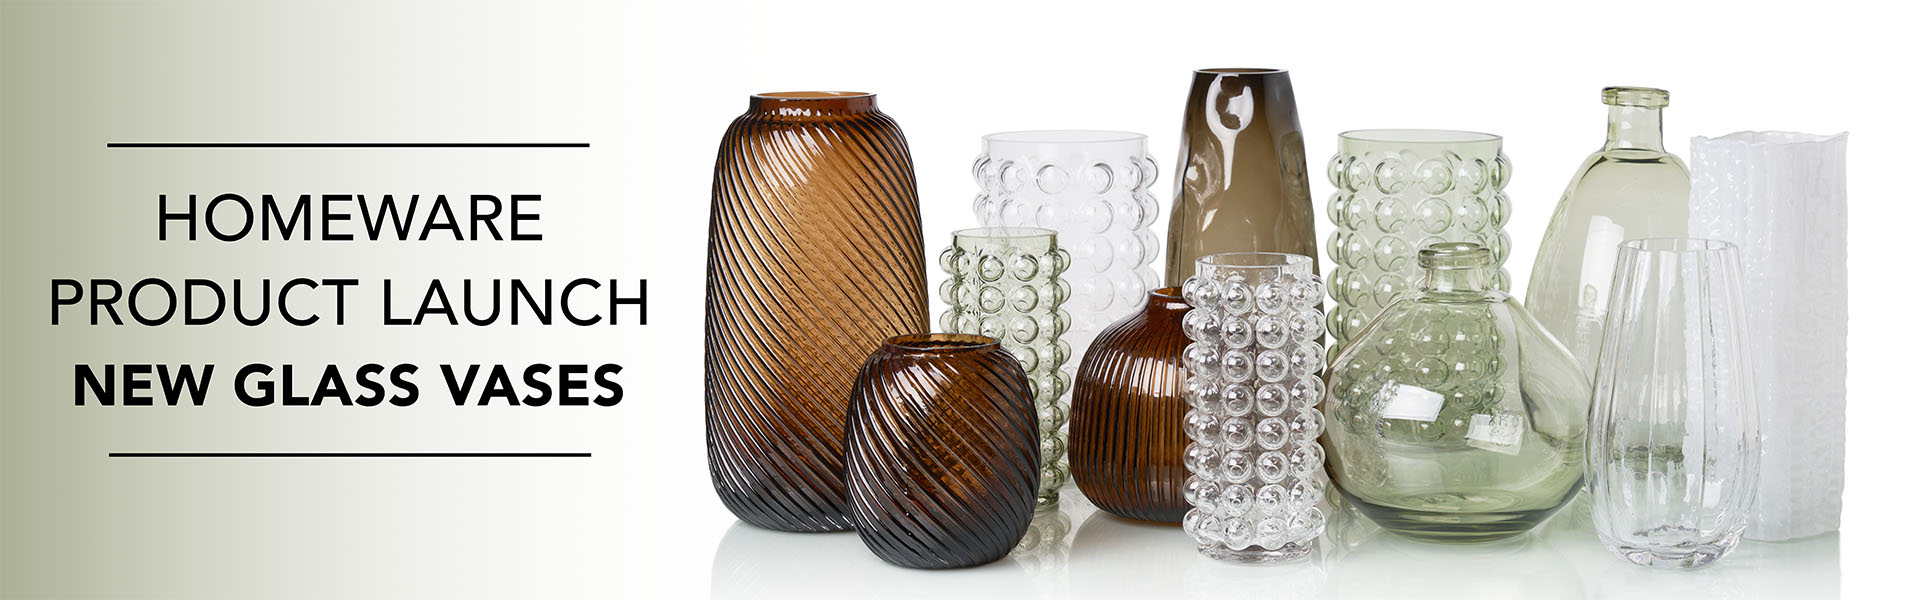 Homeware Product Launch. New Vases